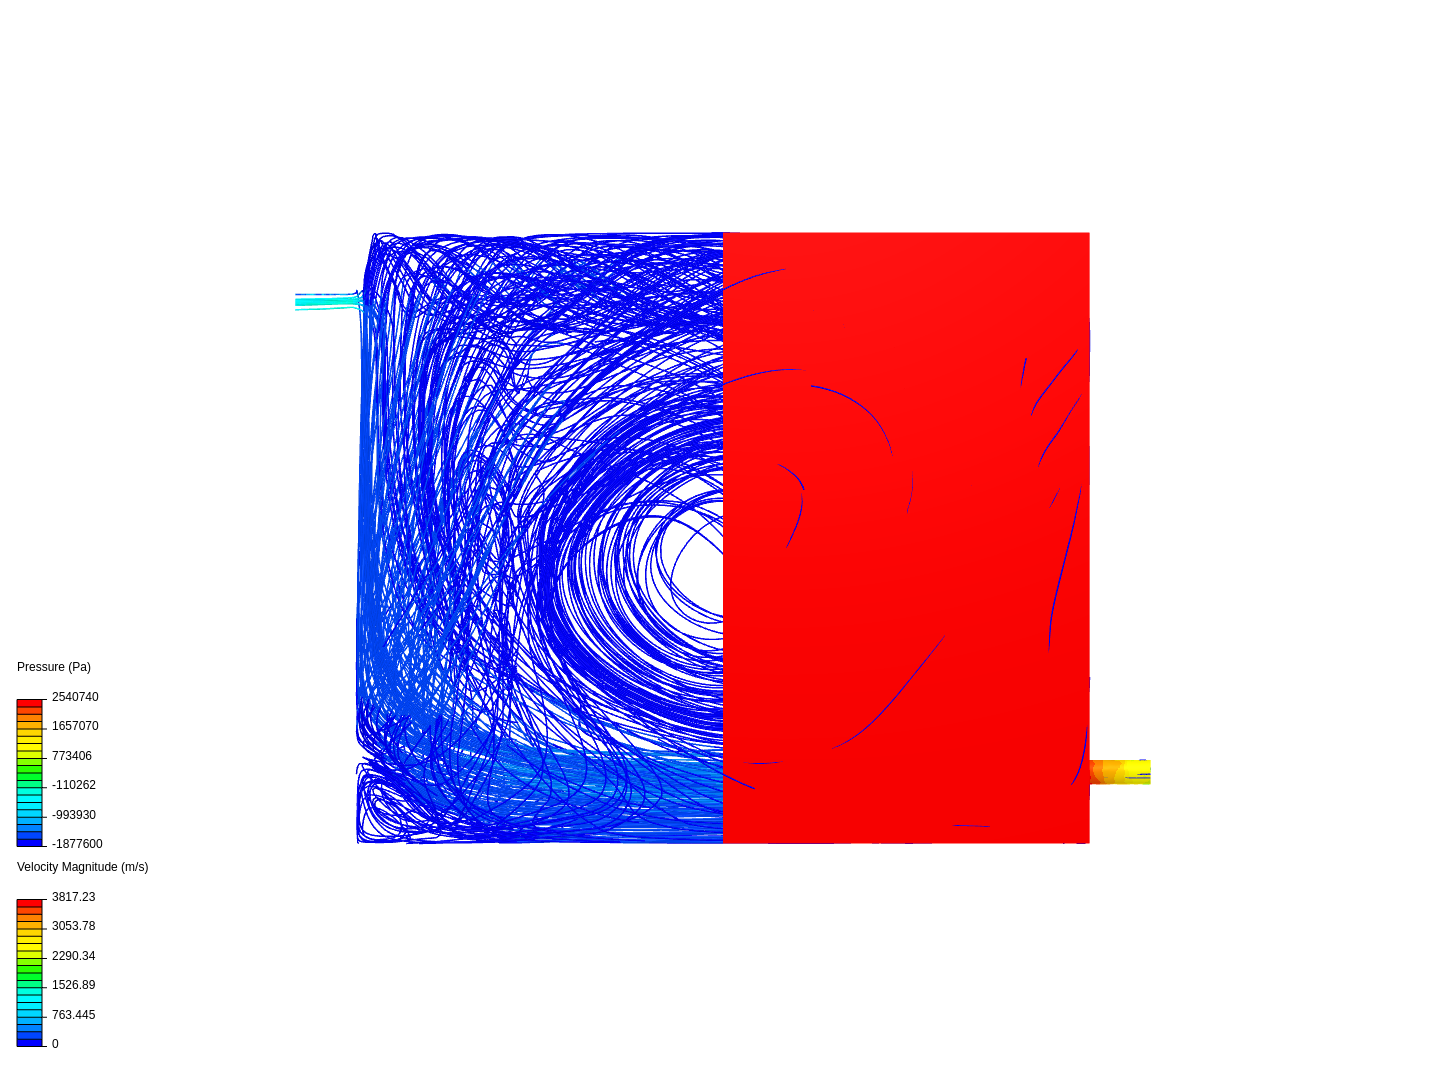 Chamber gas flow image